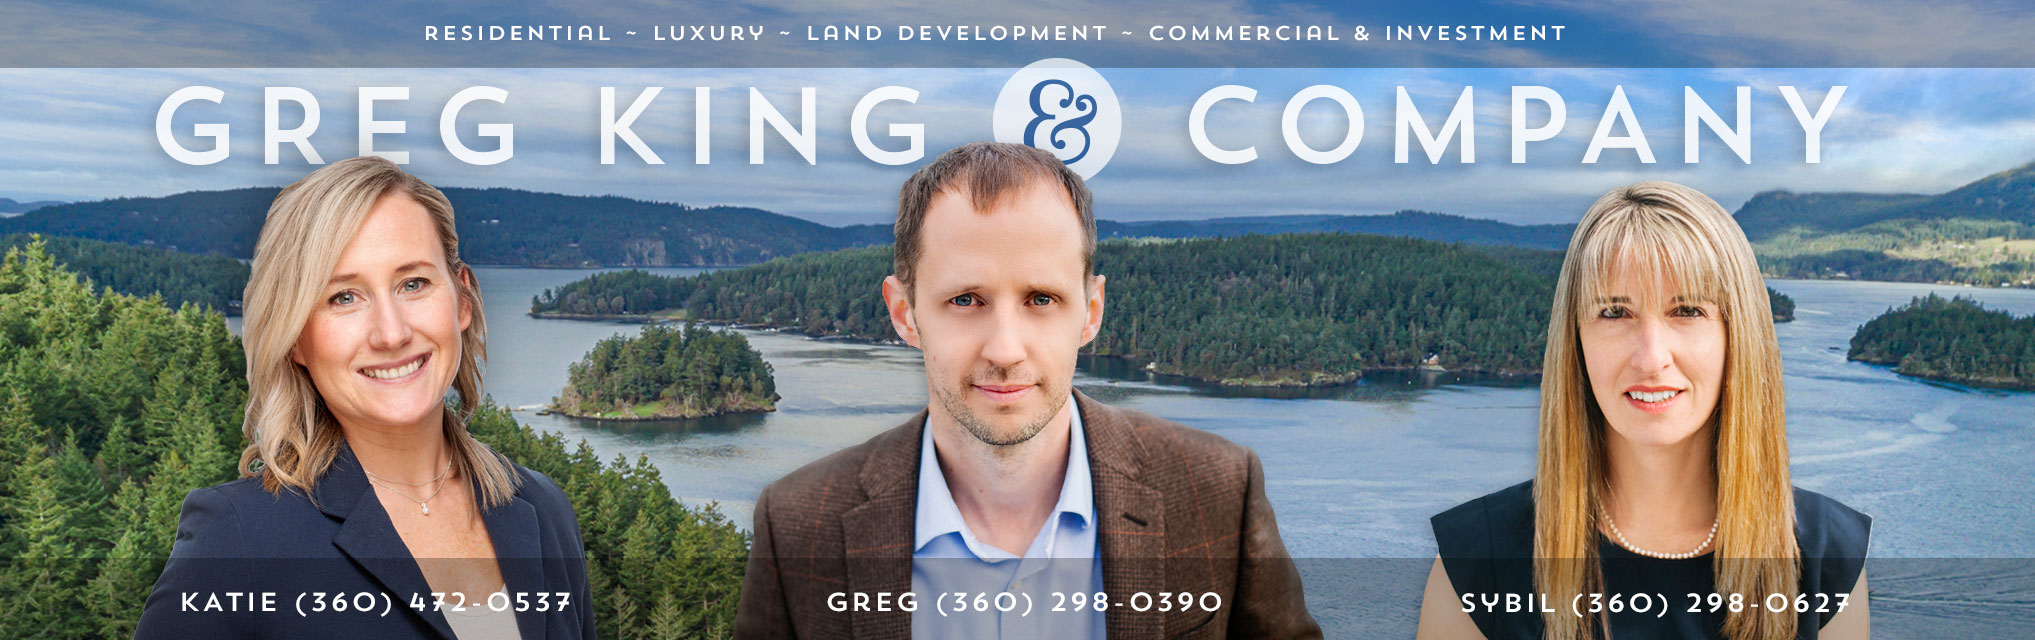 Greg King & Company employees and contact information